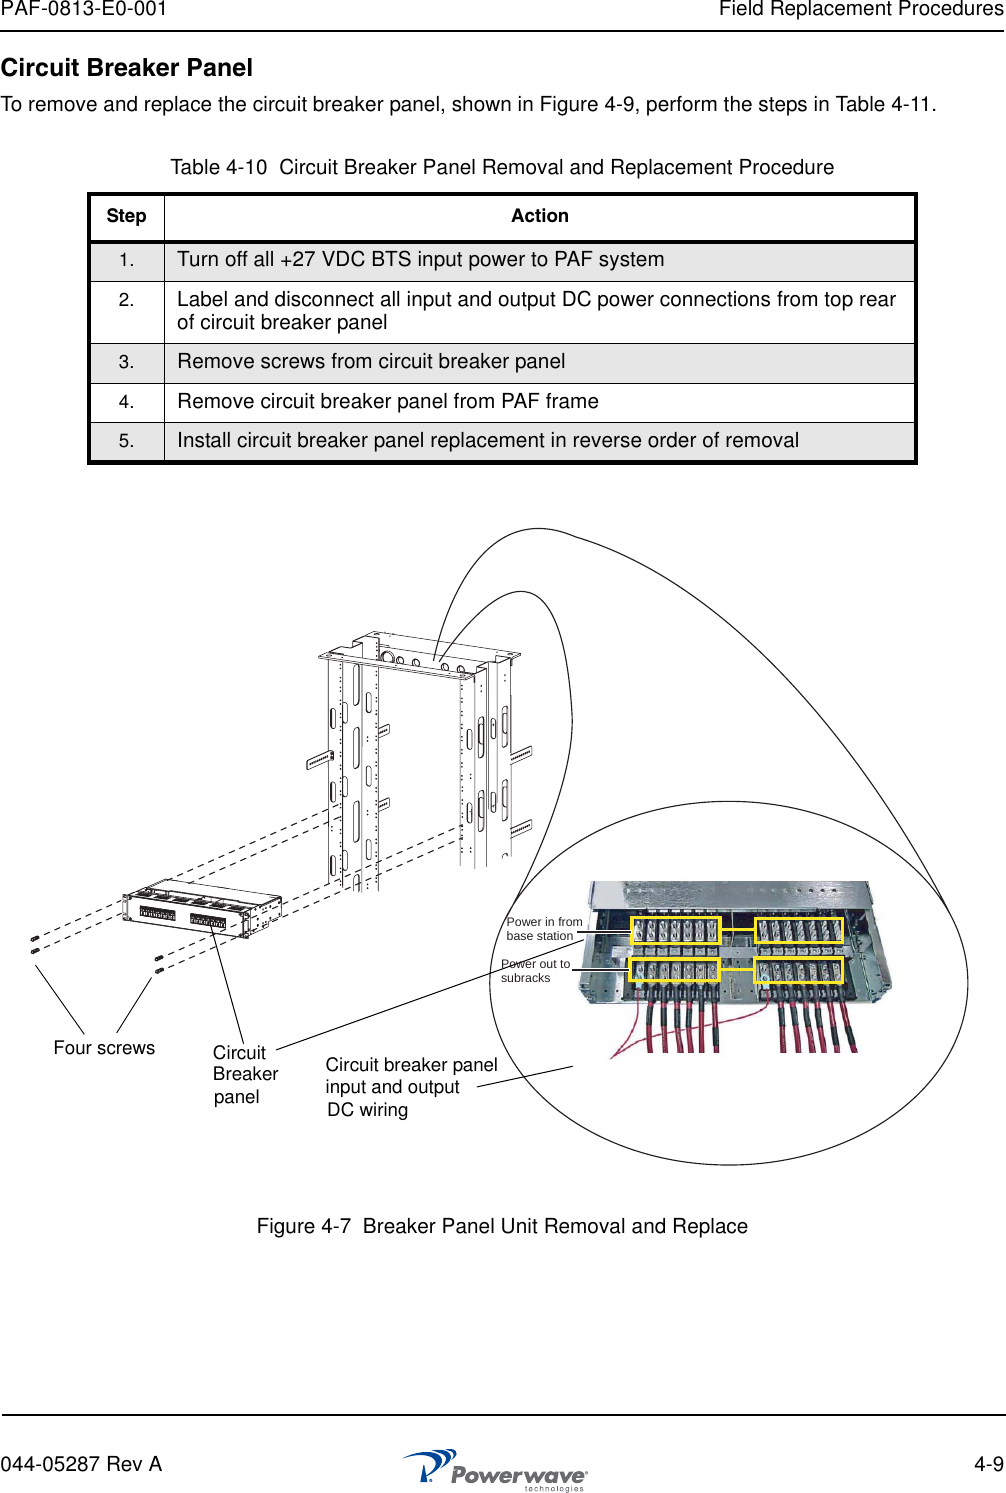 PAF-0813-E0-001 Field Replacement Procedures044-05287 Rev A 4-9Circuit Breaker PanelTo remove and replace the circuit breaker panel, shown in Figure 4-9, perform the steps in Table 4-11. Figure 4-7  Breaker Panel Unit Removal and ReplaceTable 4-10  Circuit Breaker Panel Removal and Replacement ProcedureStep Action1. Turn off all +27 VDC BTS input power to PAF system2. Label and disconnect all input and output DC power connections from top rear of circuit breaker panel3. Remove screws from circuit breaker panel4. Remove circuit breaker panel from PAF frame5. Install circuit breaker panel replacement in reverse order of removalPower in from base stationPower out tosubracksCircuit breaker panelinput and outputDC wiringCircuit Four screwspanelBreaker 